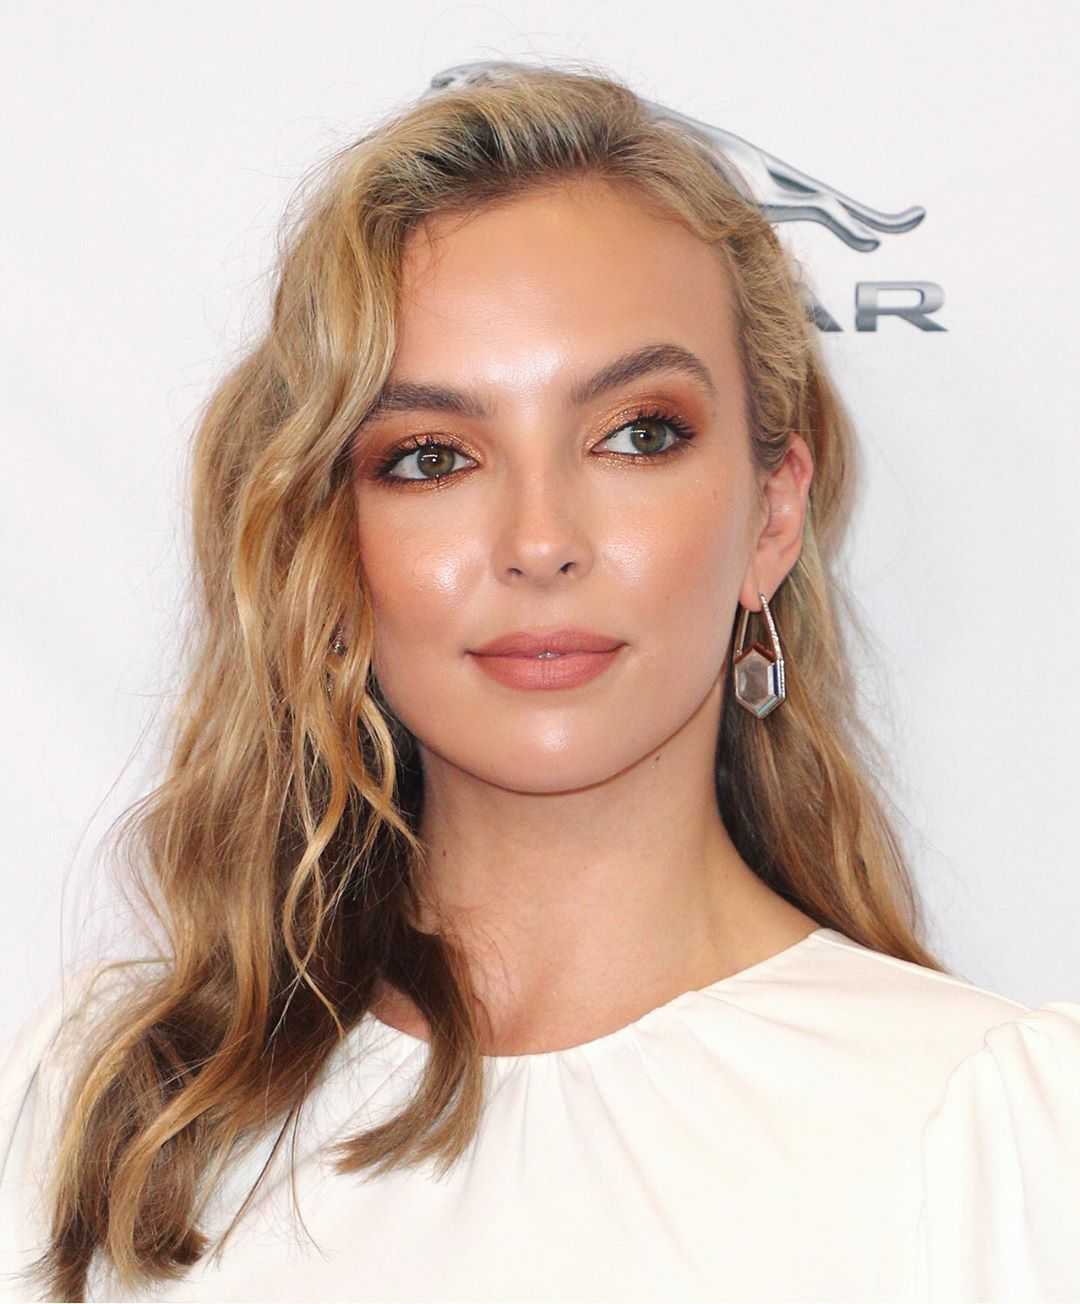 70+ Hot Pictures Of Jodie Comer Which Will Make You Sweat All Over 10